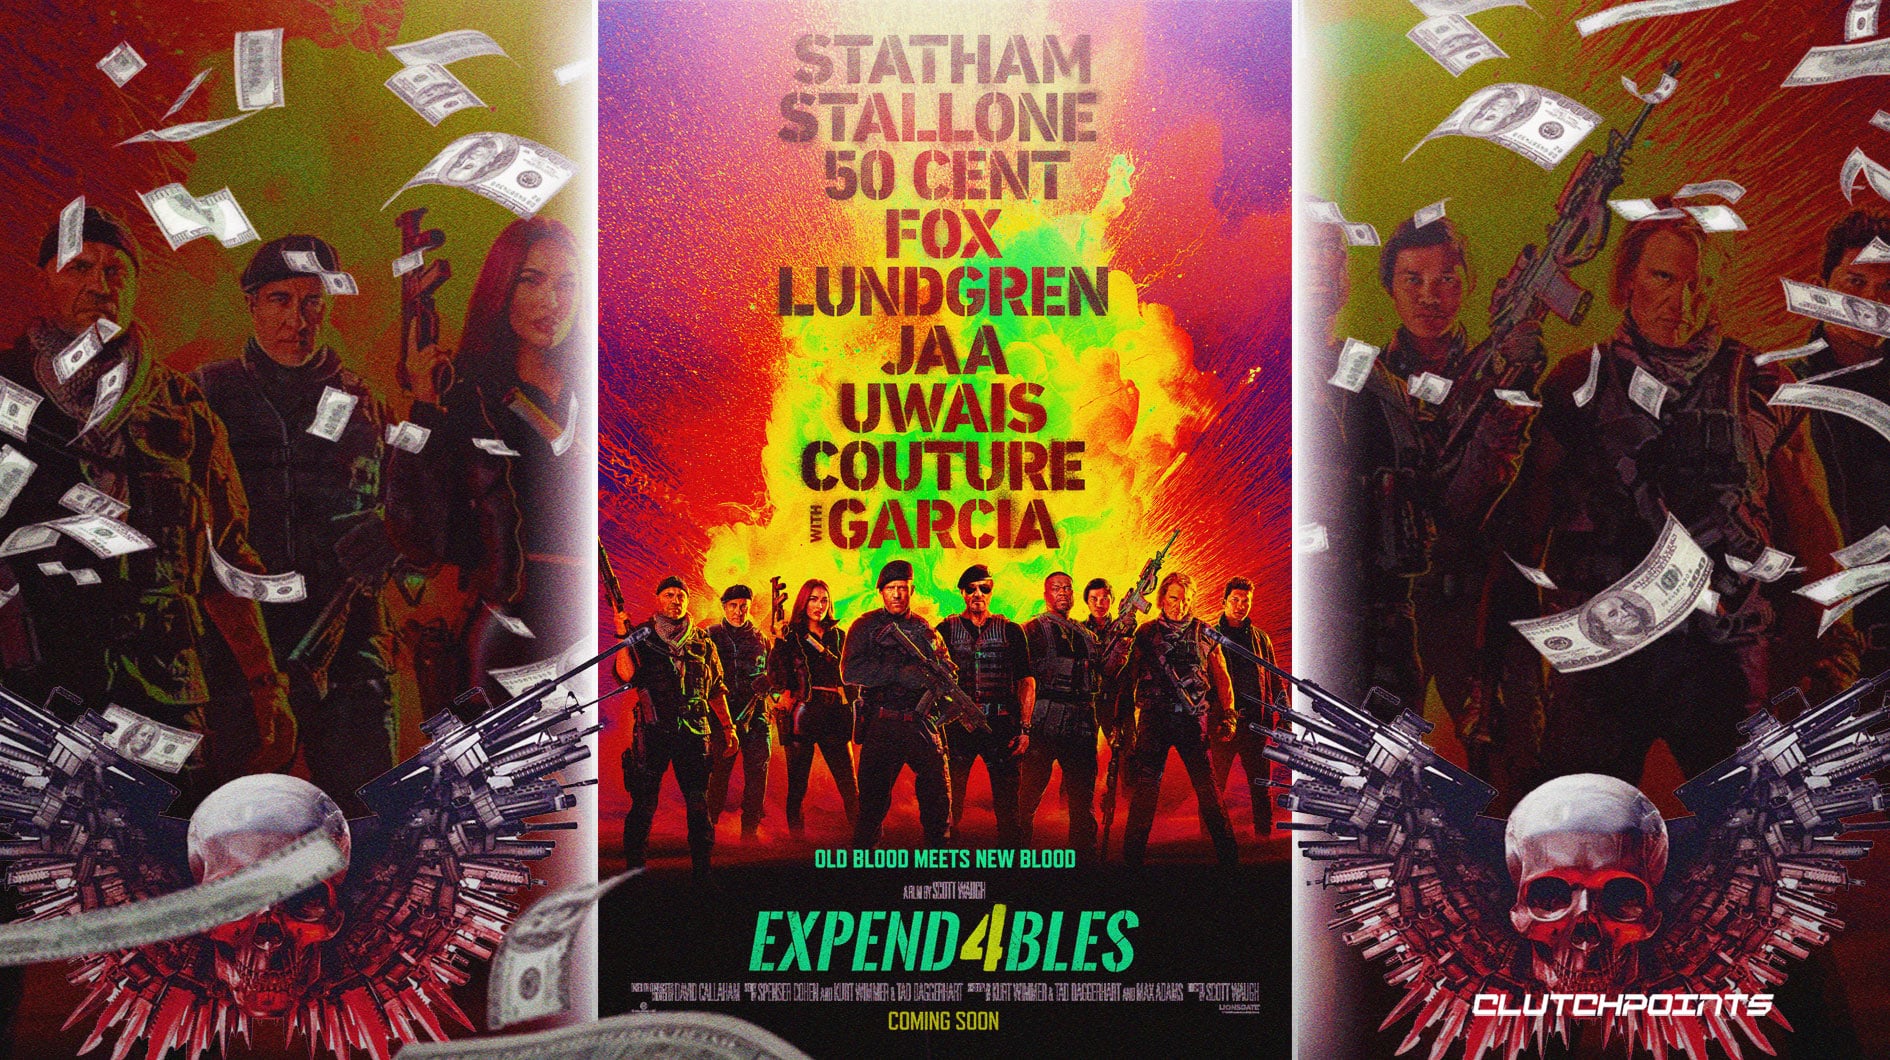 The Expendables 4 (Expend4bles), box office